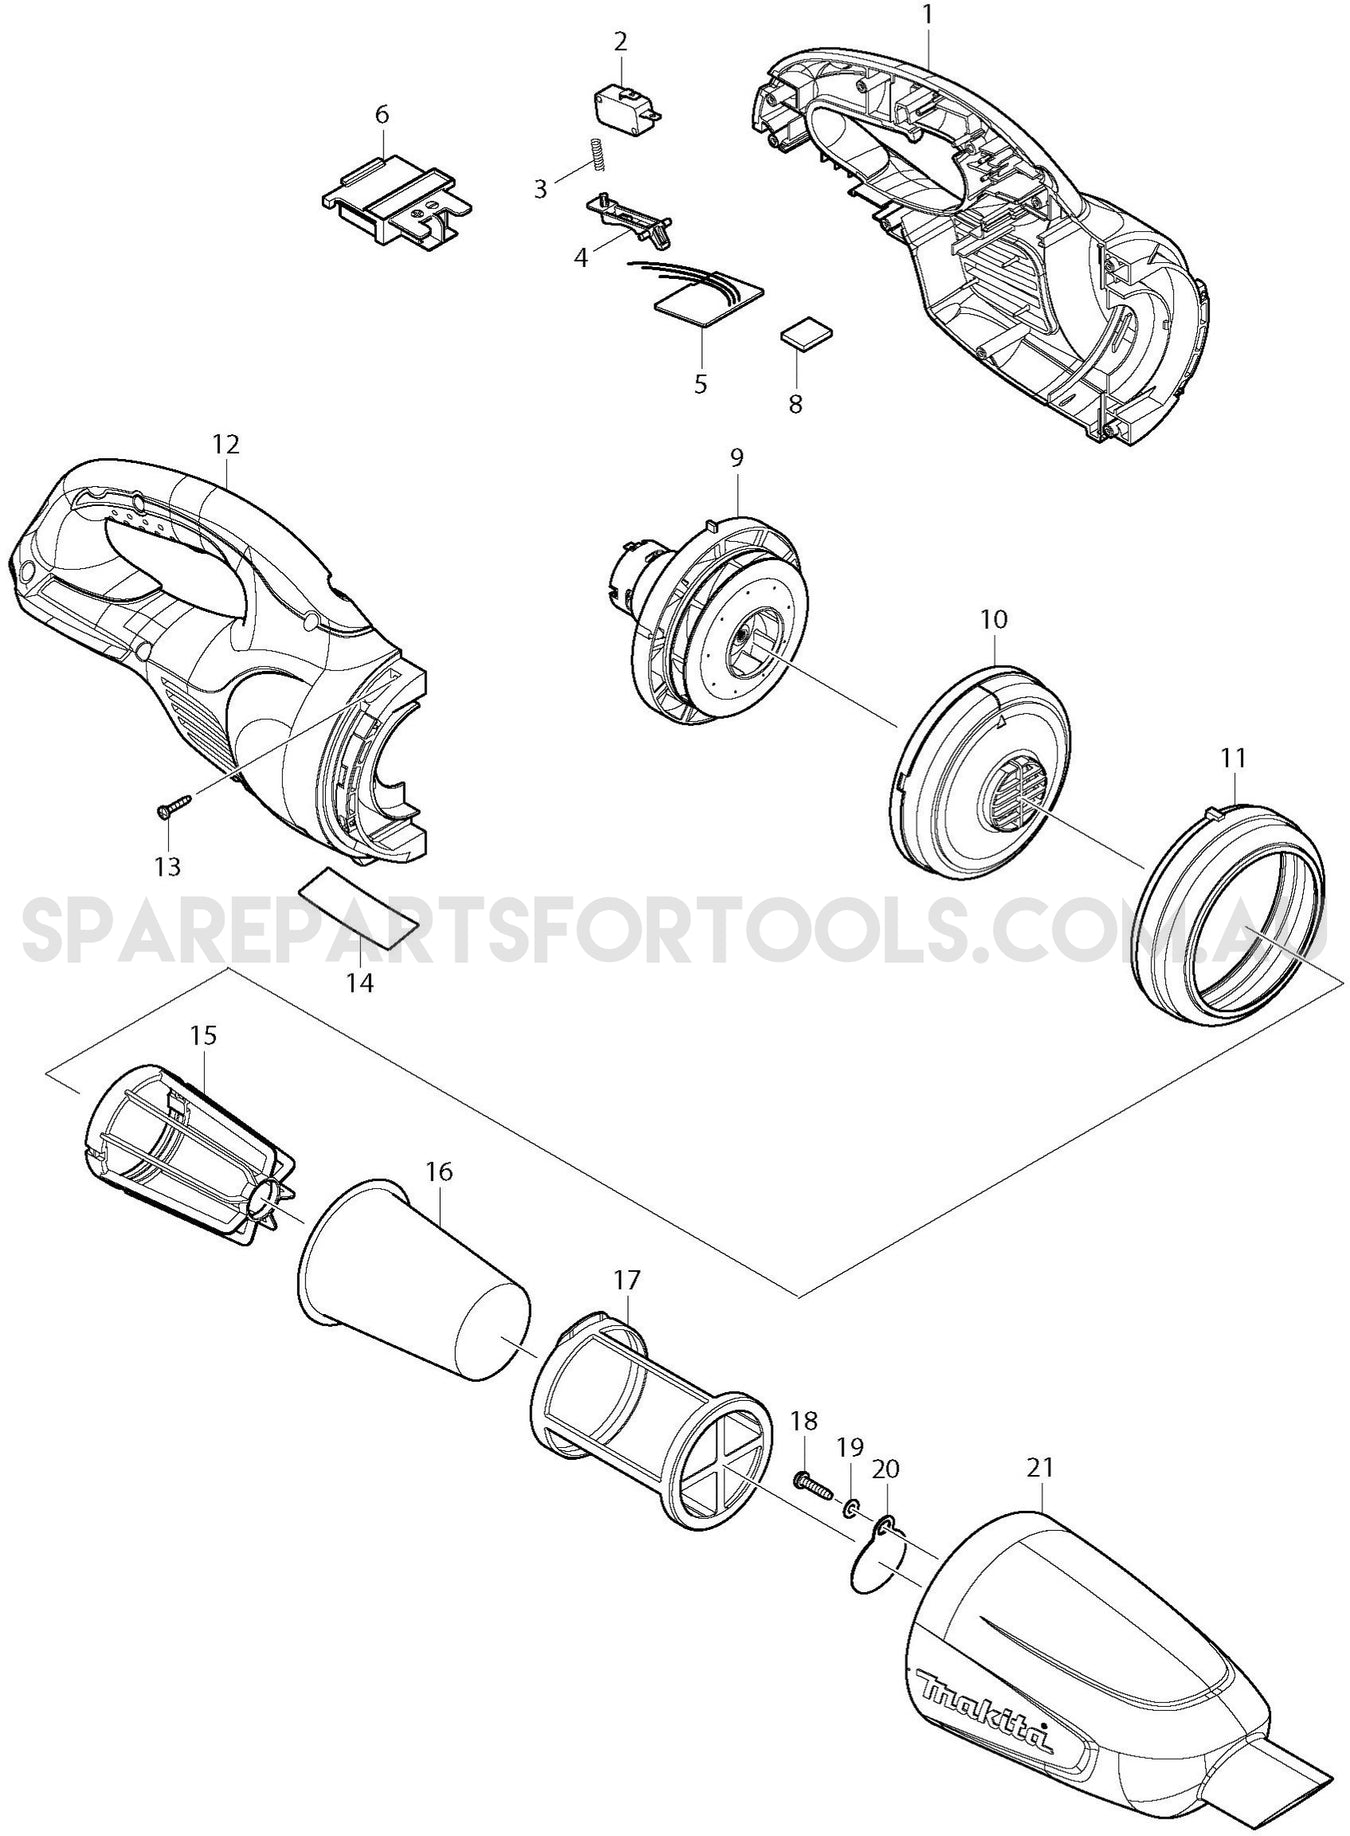 Makita DCL180Z Spare Parts